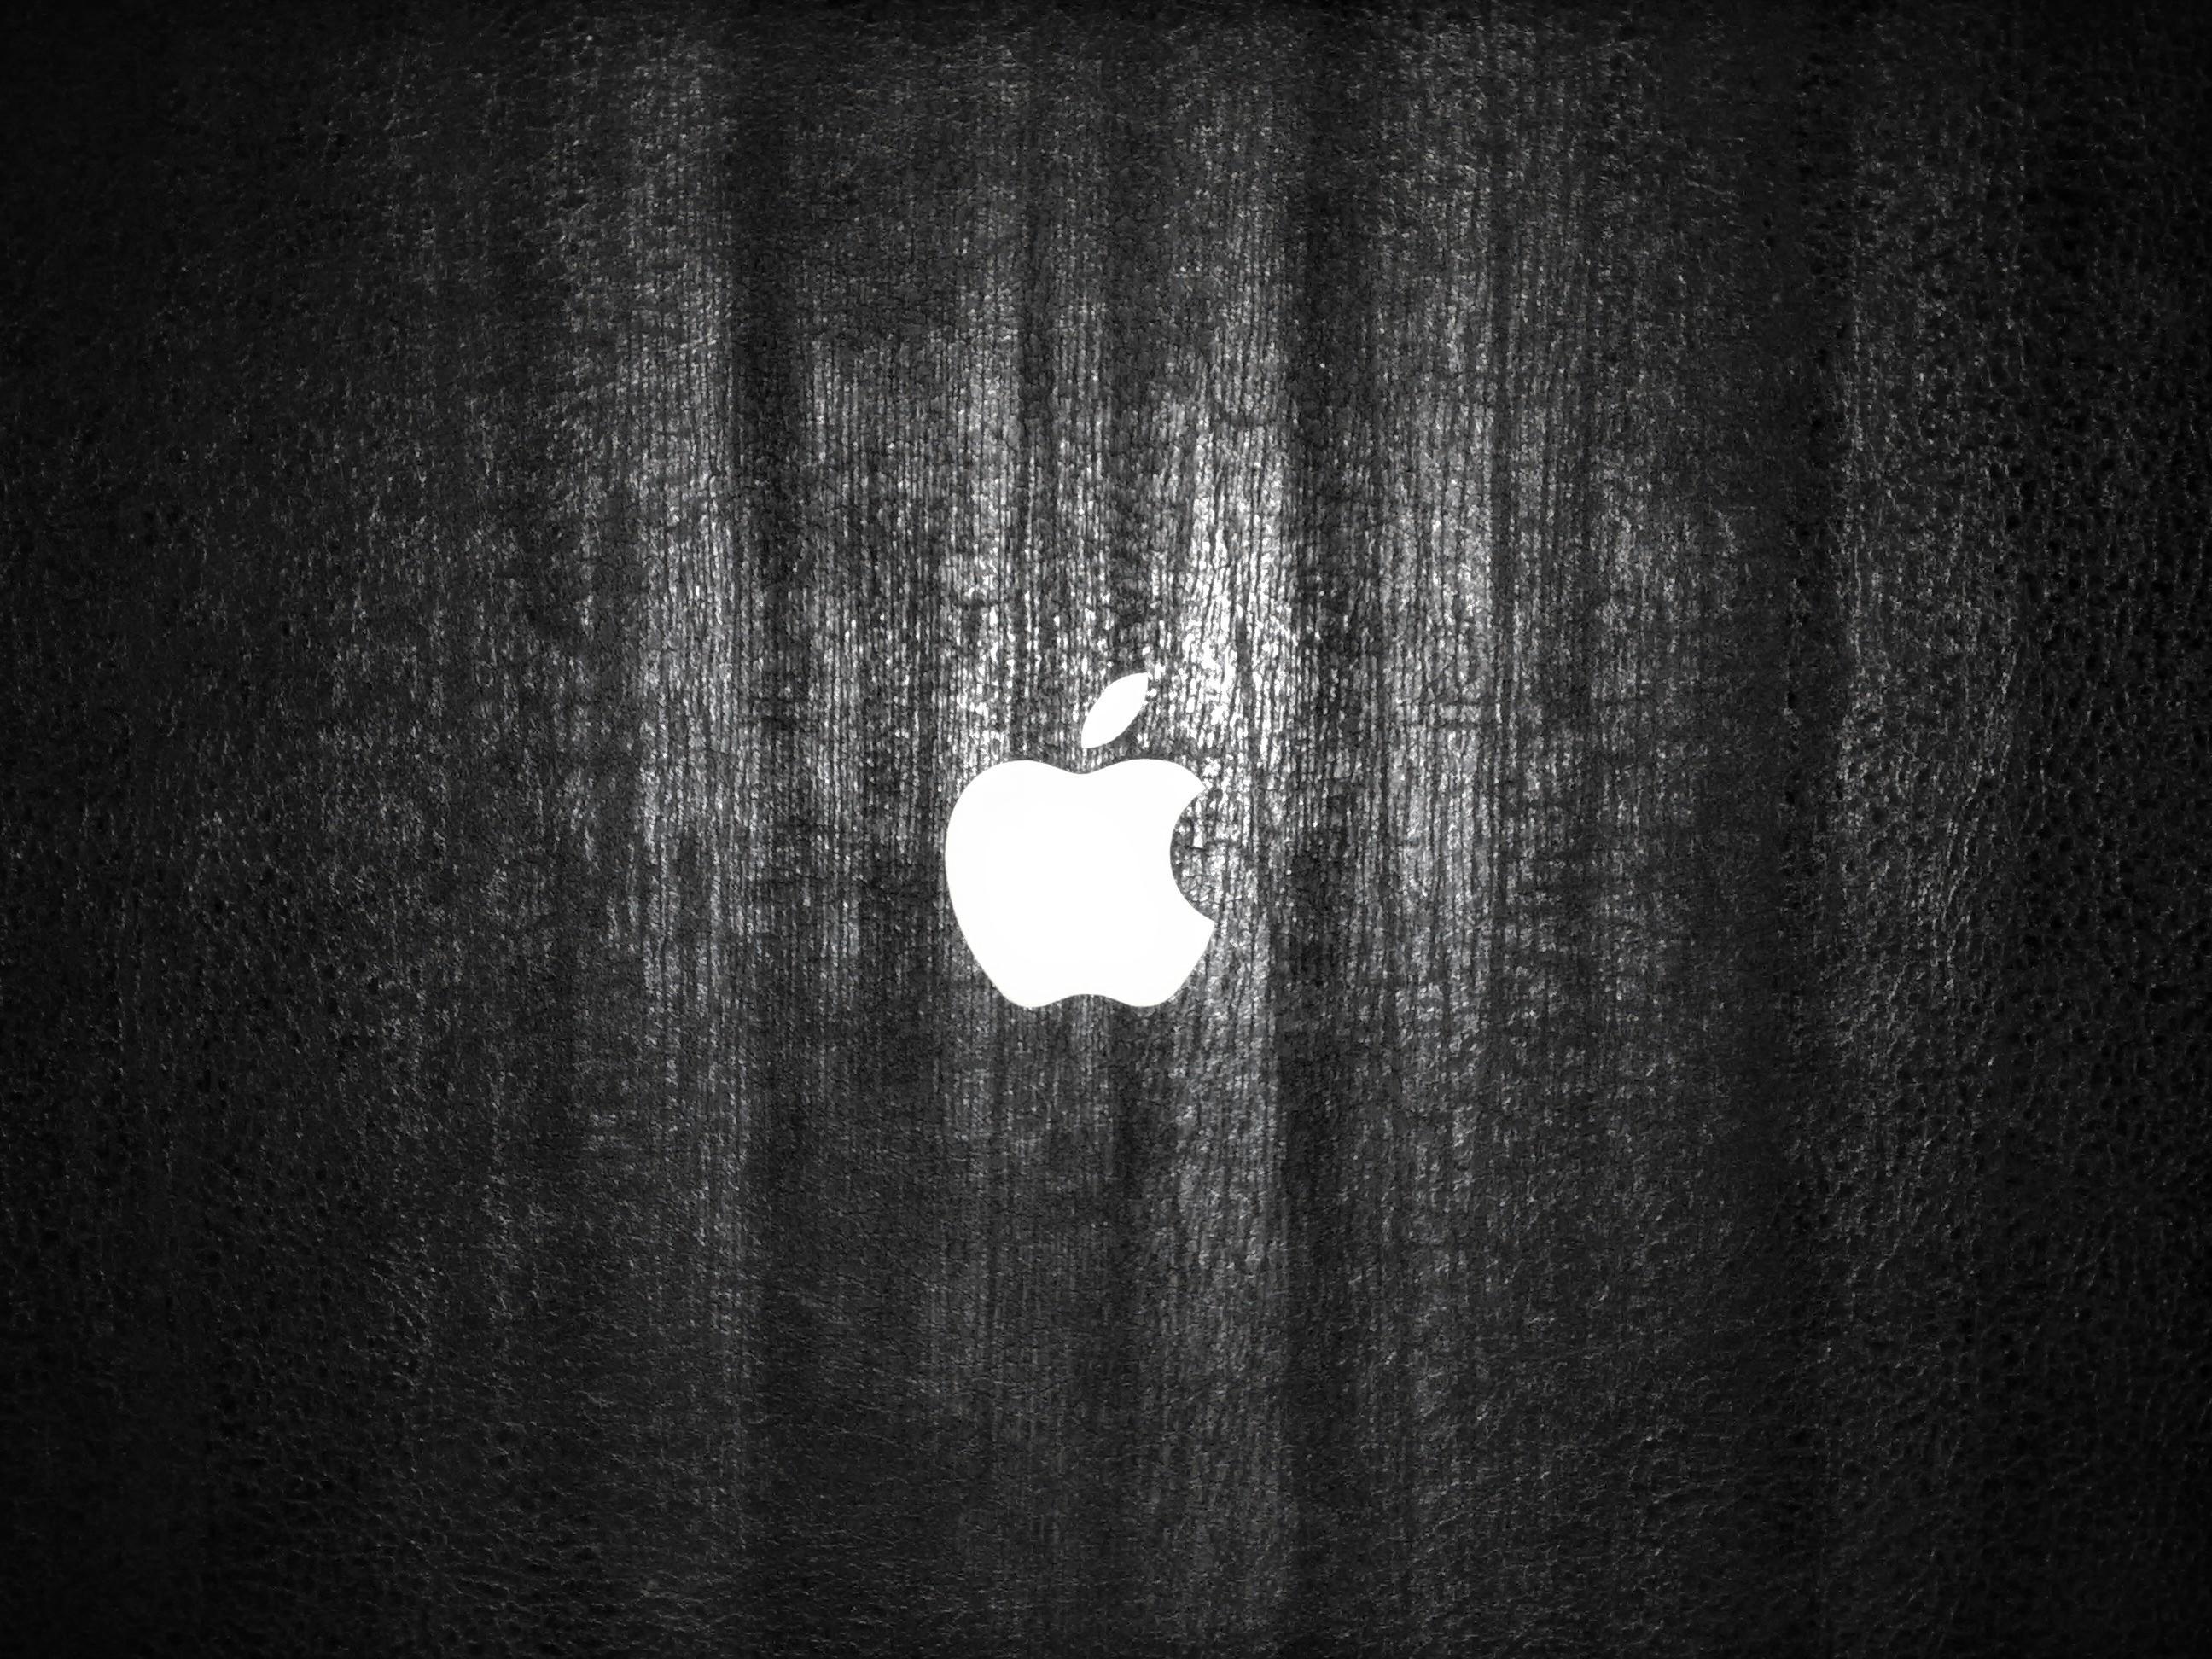 apple 4K wallpaper for your desktop or mobile screen free and easy